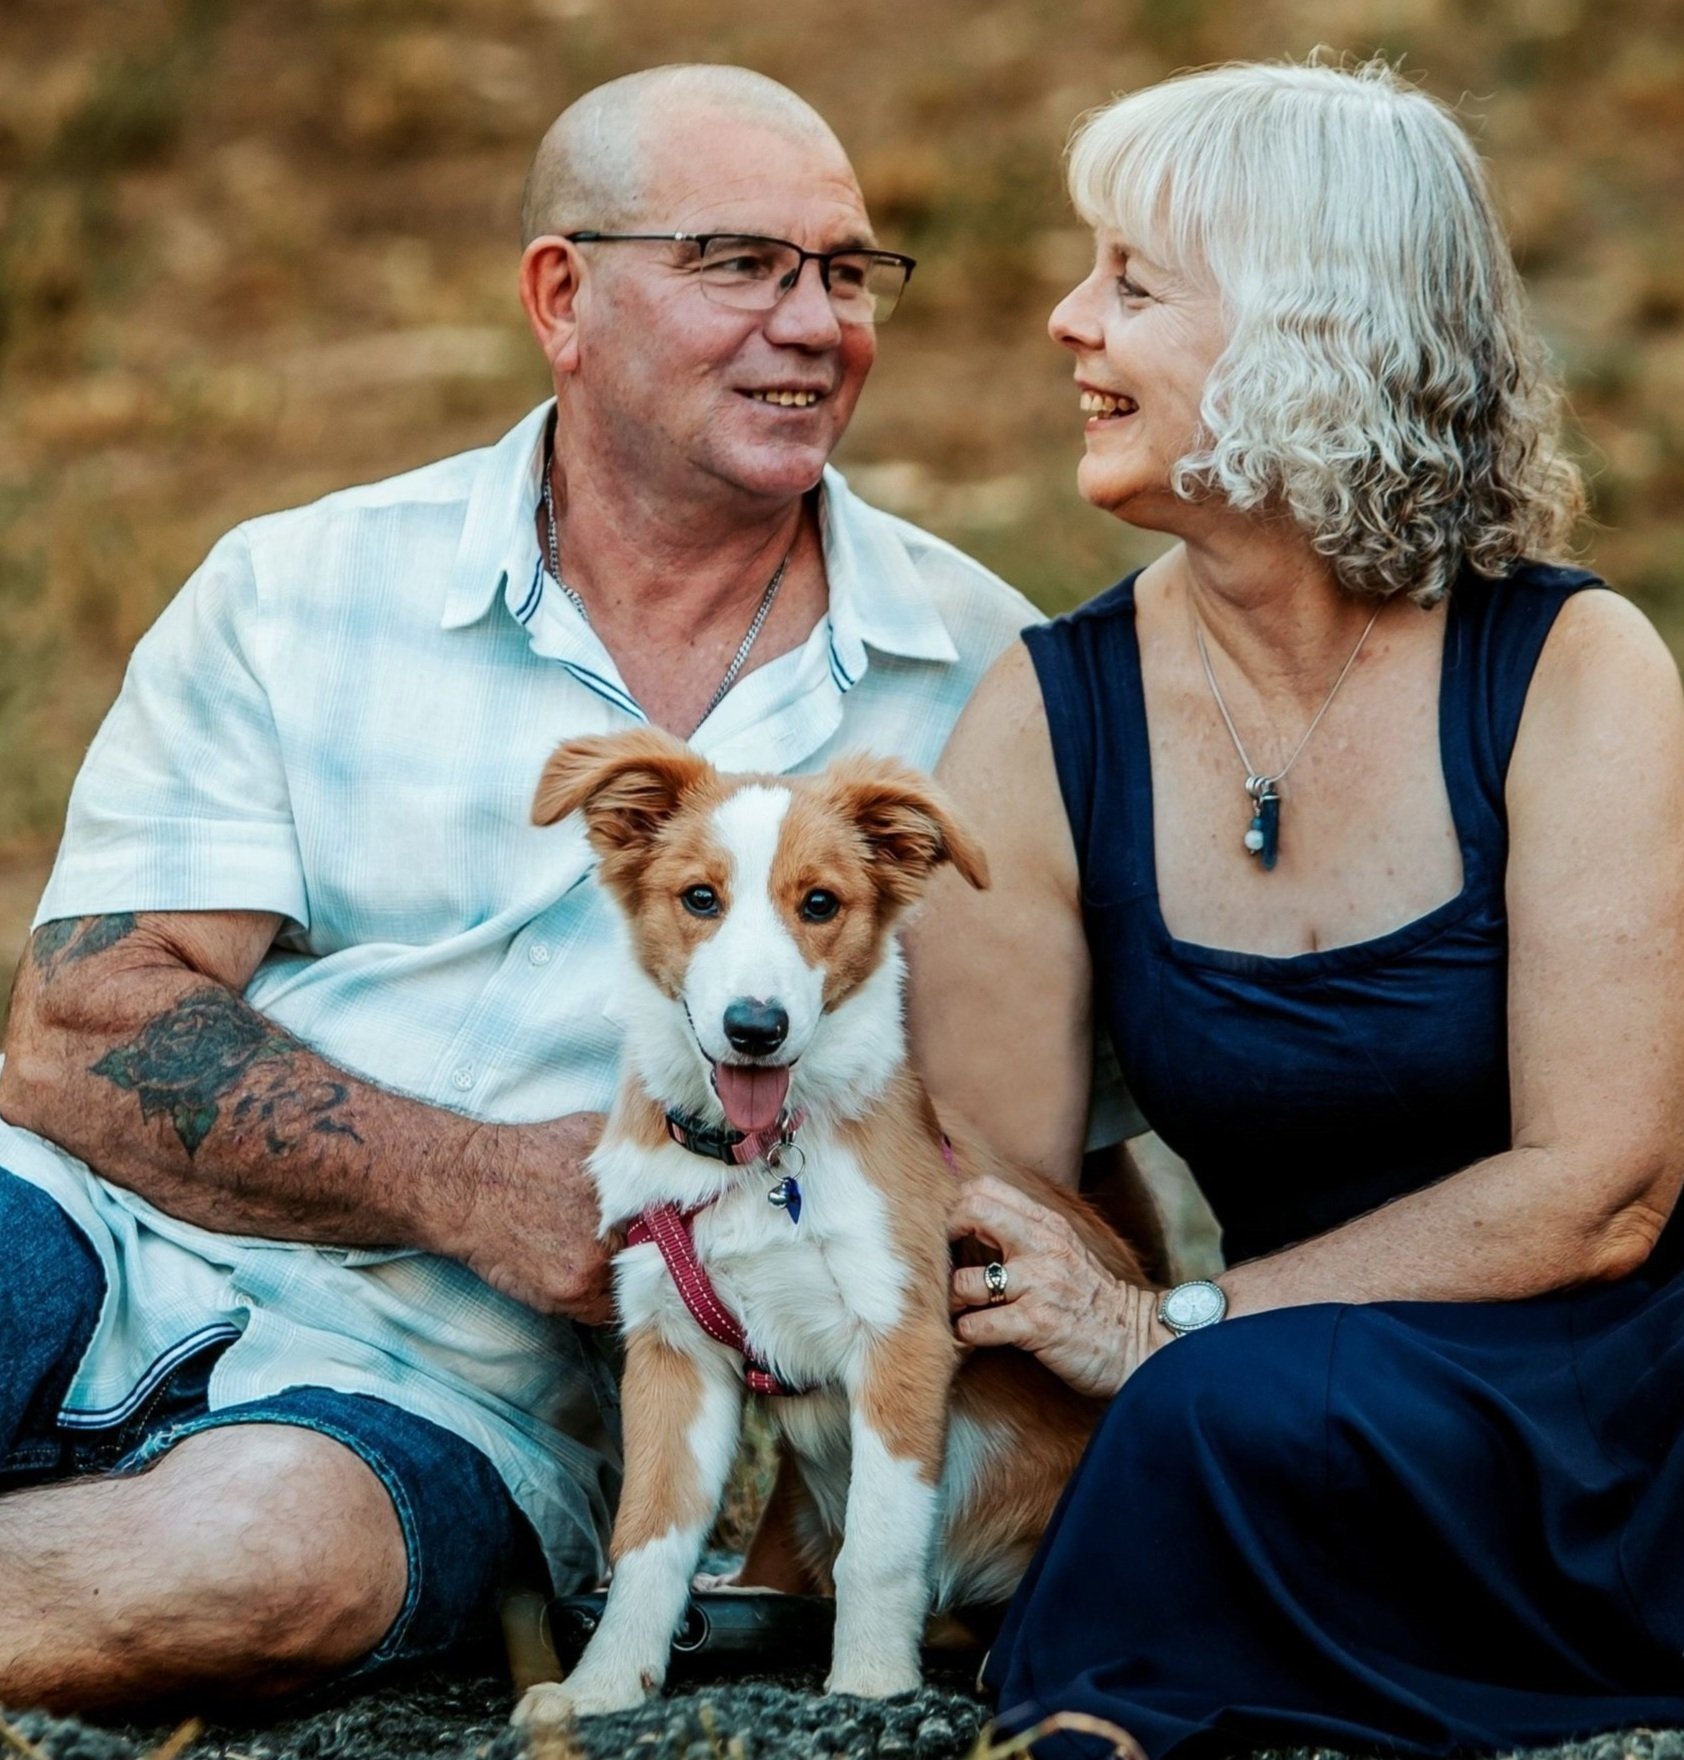  - I am an intuitive/energy healer and I live with my husband and our two border collies in a small sapphire-mining community in central Queensland, Australia. For 14 years I have worked in energy medicine with both in-house and distance clients. In my work, I help highly sensitive people to embrace their life purpose and harmonise their inner wisdom, intelligence and in-body connections. In this process, they are able to recognise and release disharmonious belief systems, stuck emotions, disease patterns and toxicity. As a former engineer, I see science and intuition as being on a continuous spectrum rather than being distinctly separate. And I view my work as a bridge where the energetic and the logical are woven together. Because of this, my background in engineering and bioresonance therapy add unique threads to my healing sessions with wonderful outcomes!If you feel I can help you, please check out my website, read a few blog articles, watch a webinar, book an appointment or contact me directly. I look forward to working with you!